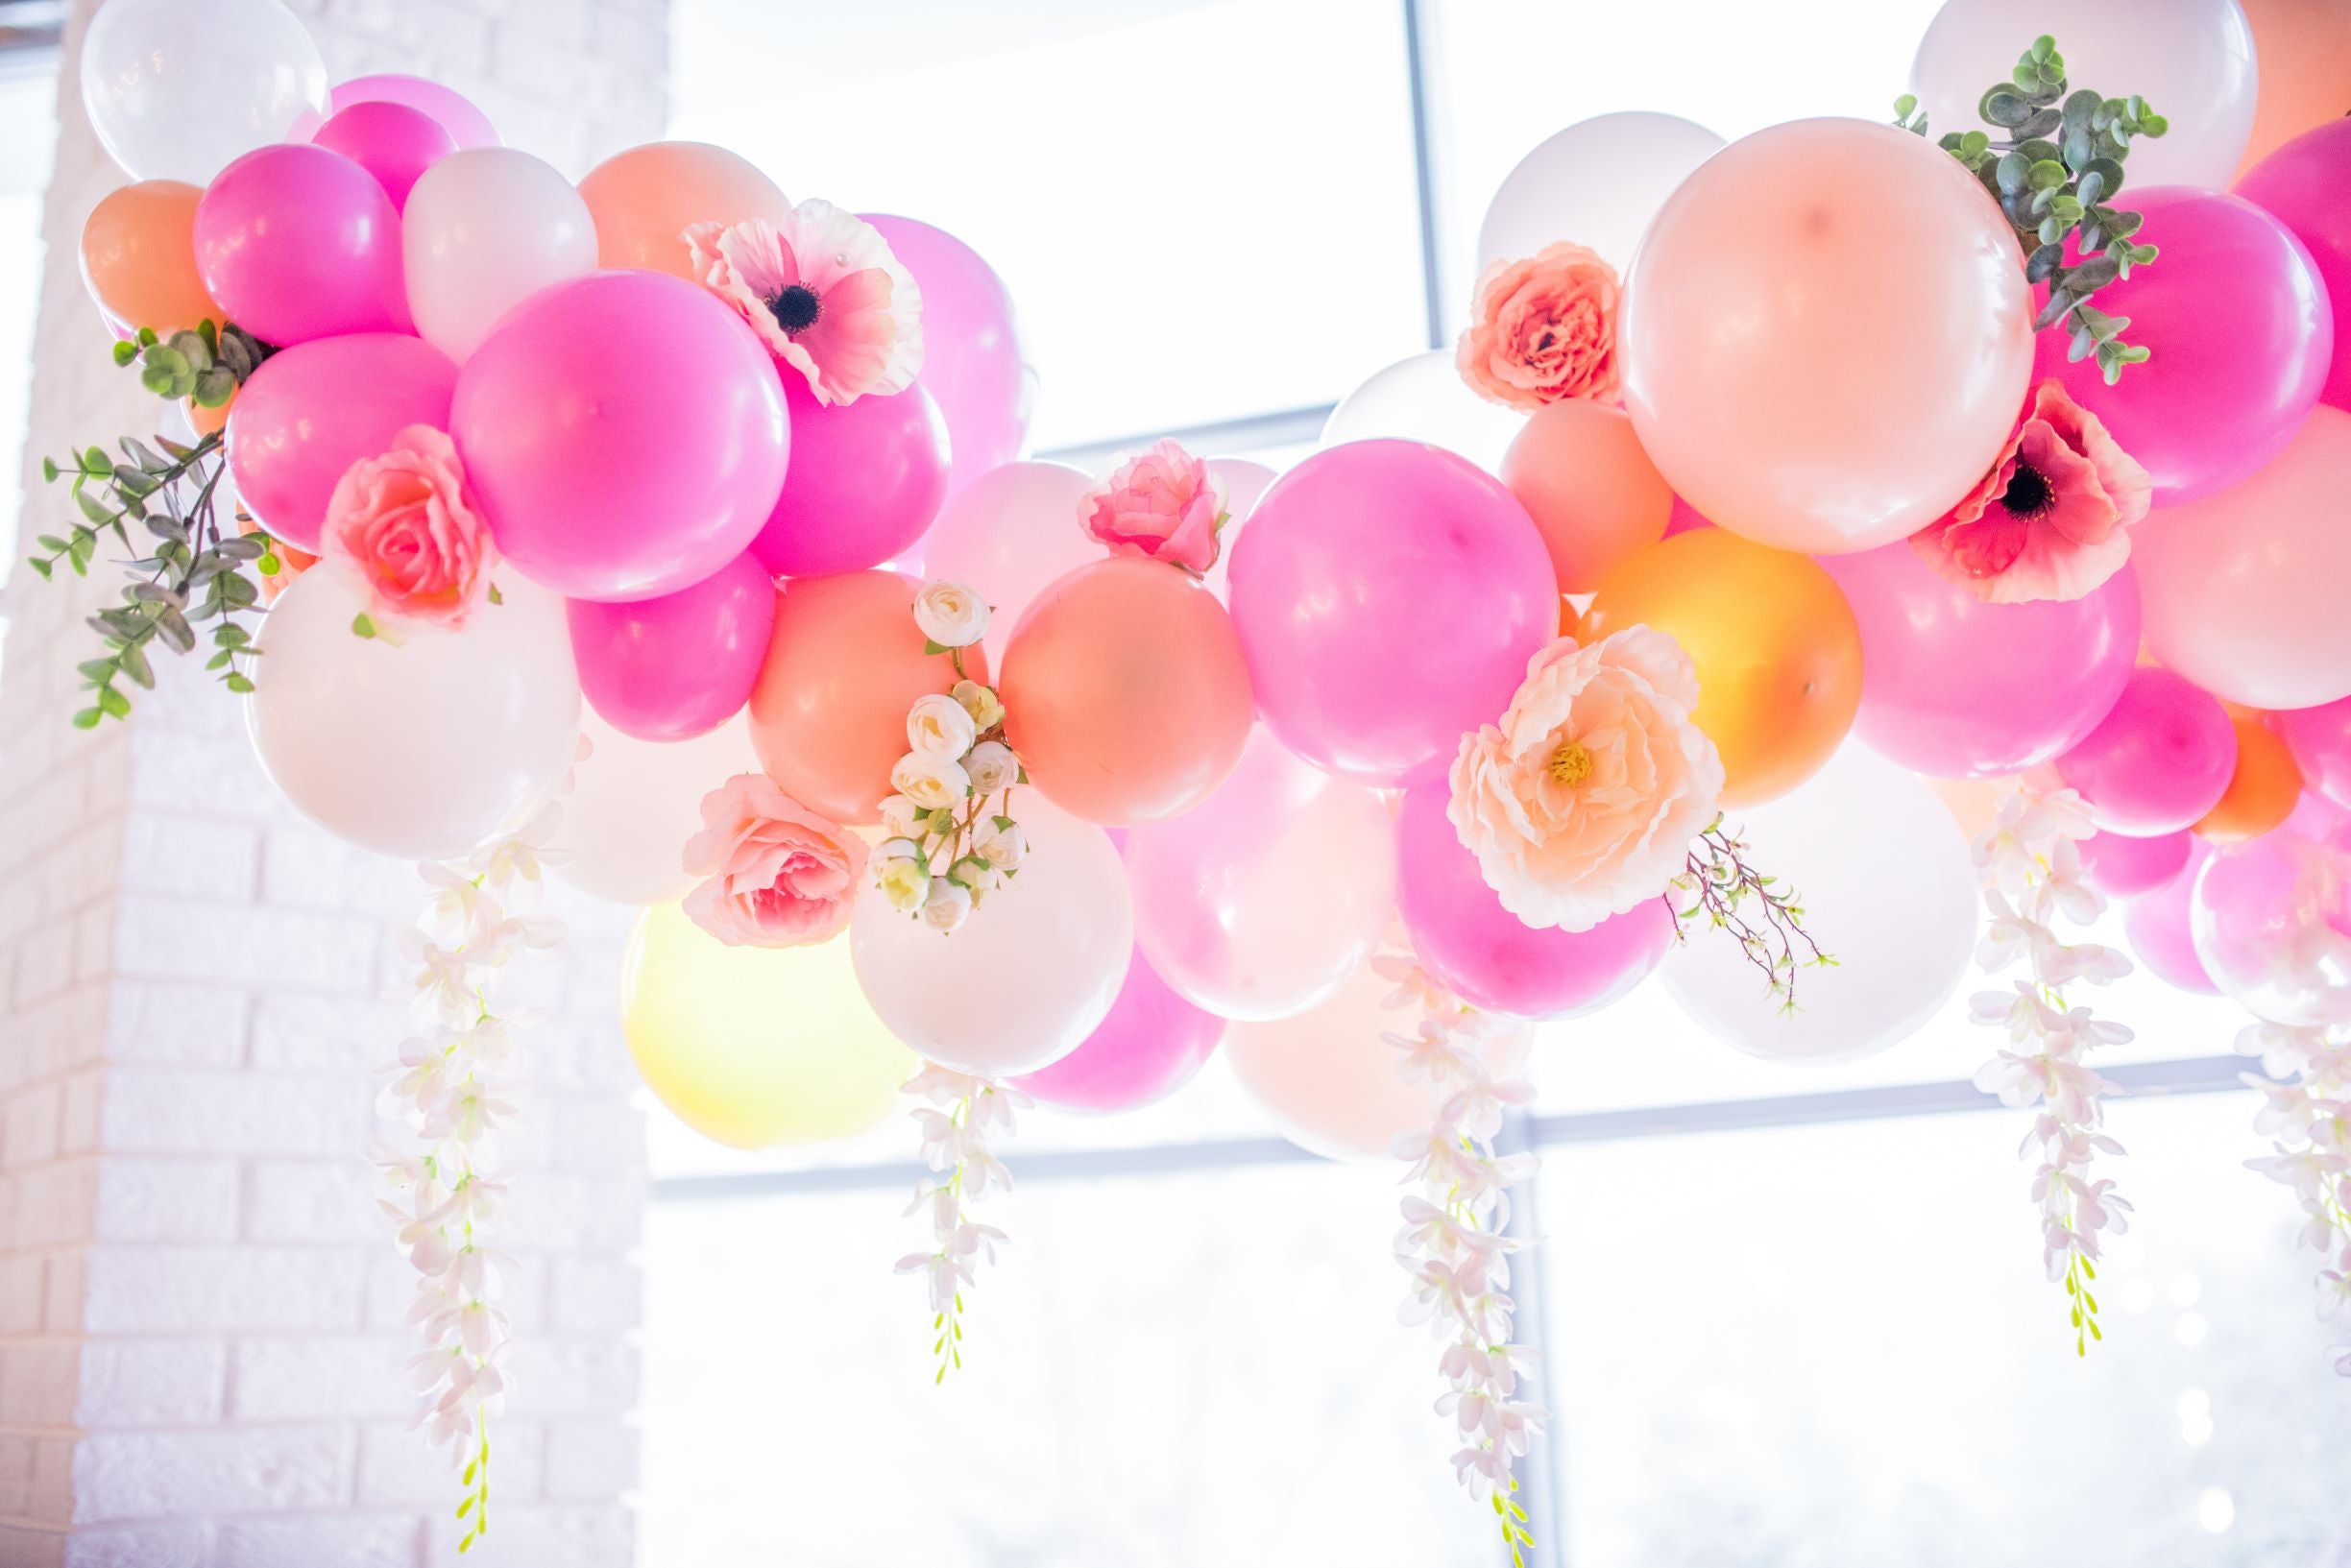 Creating those trendy matte finishes on your balloons comes at a